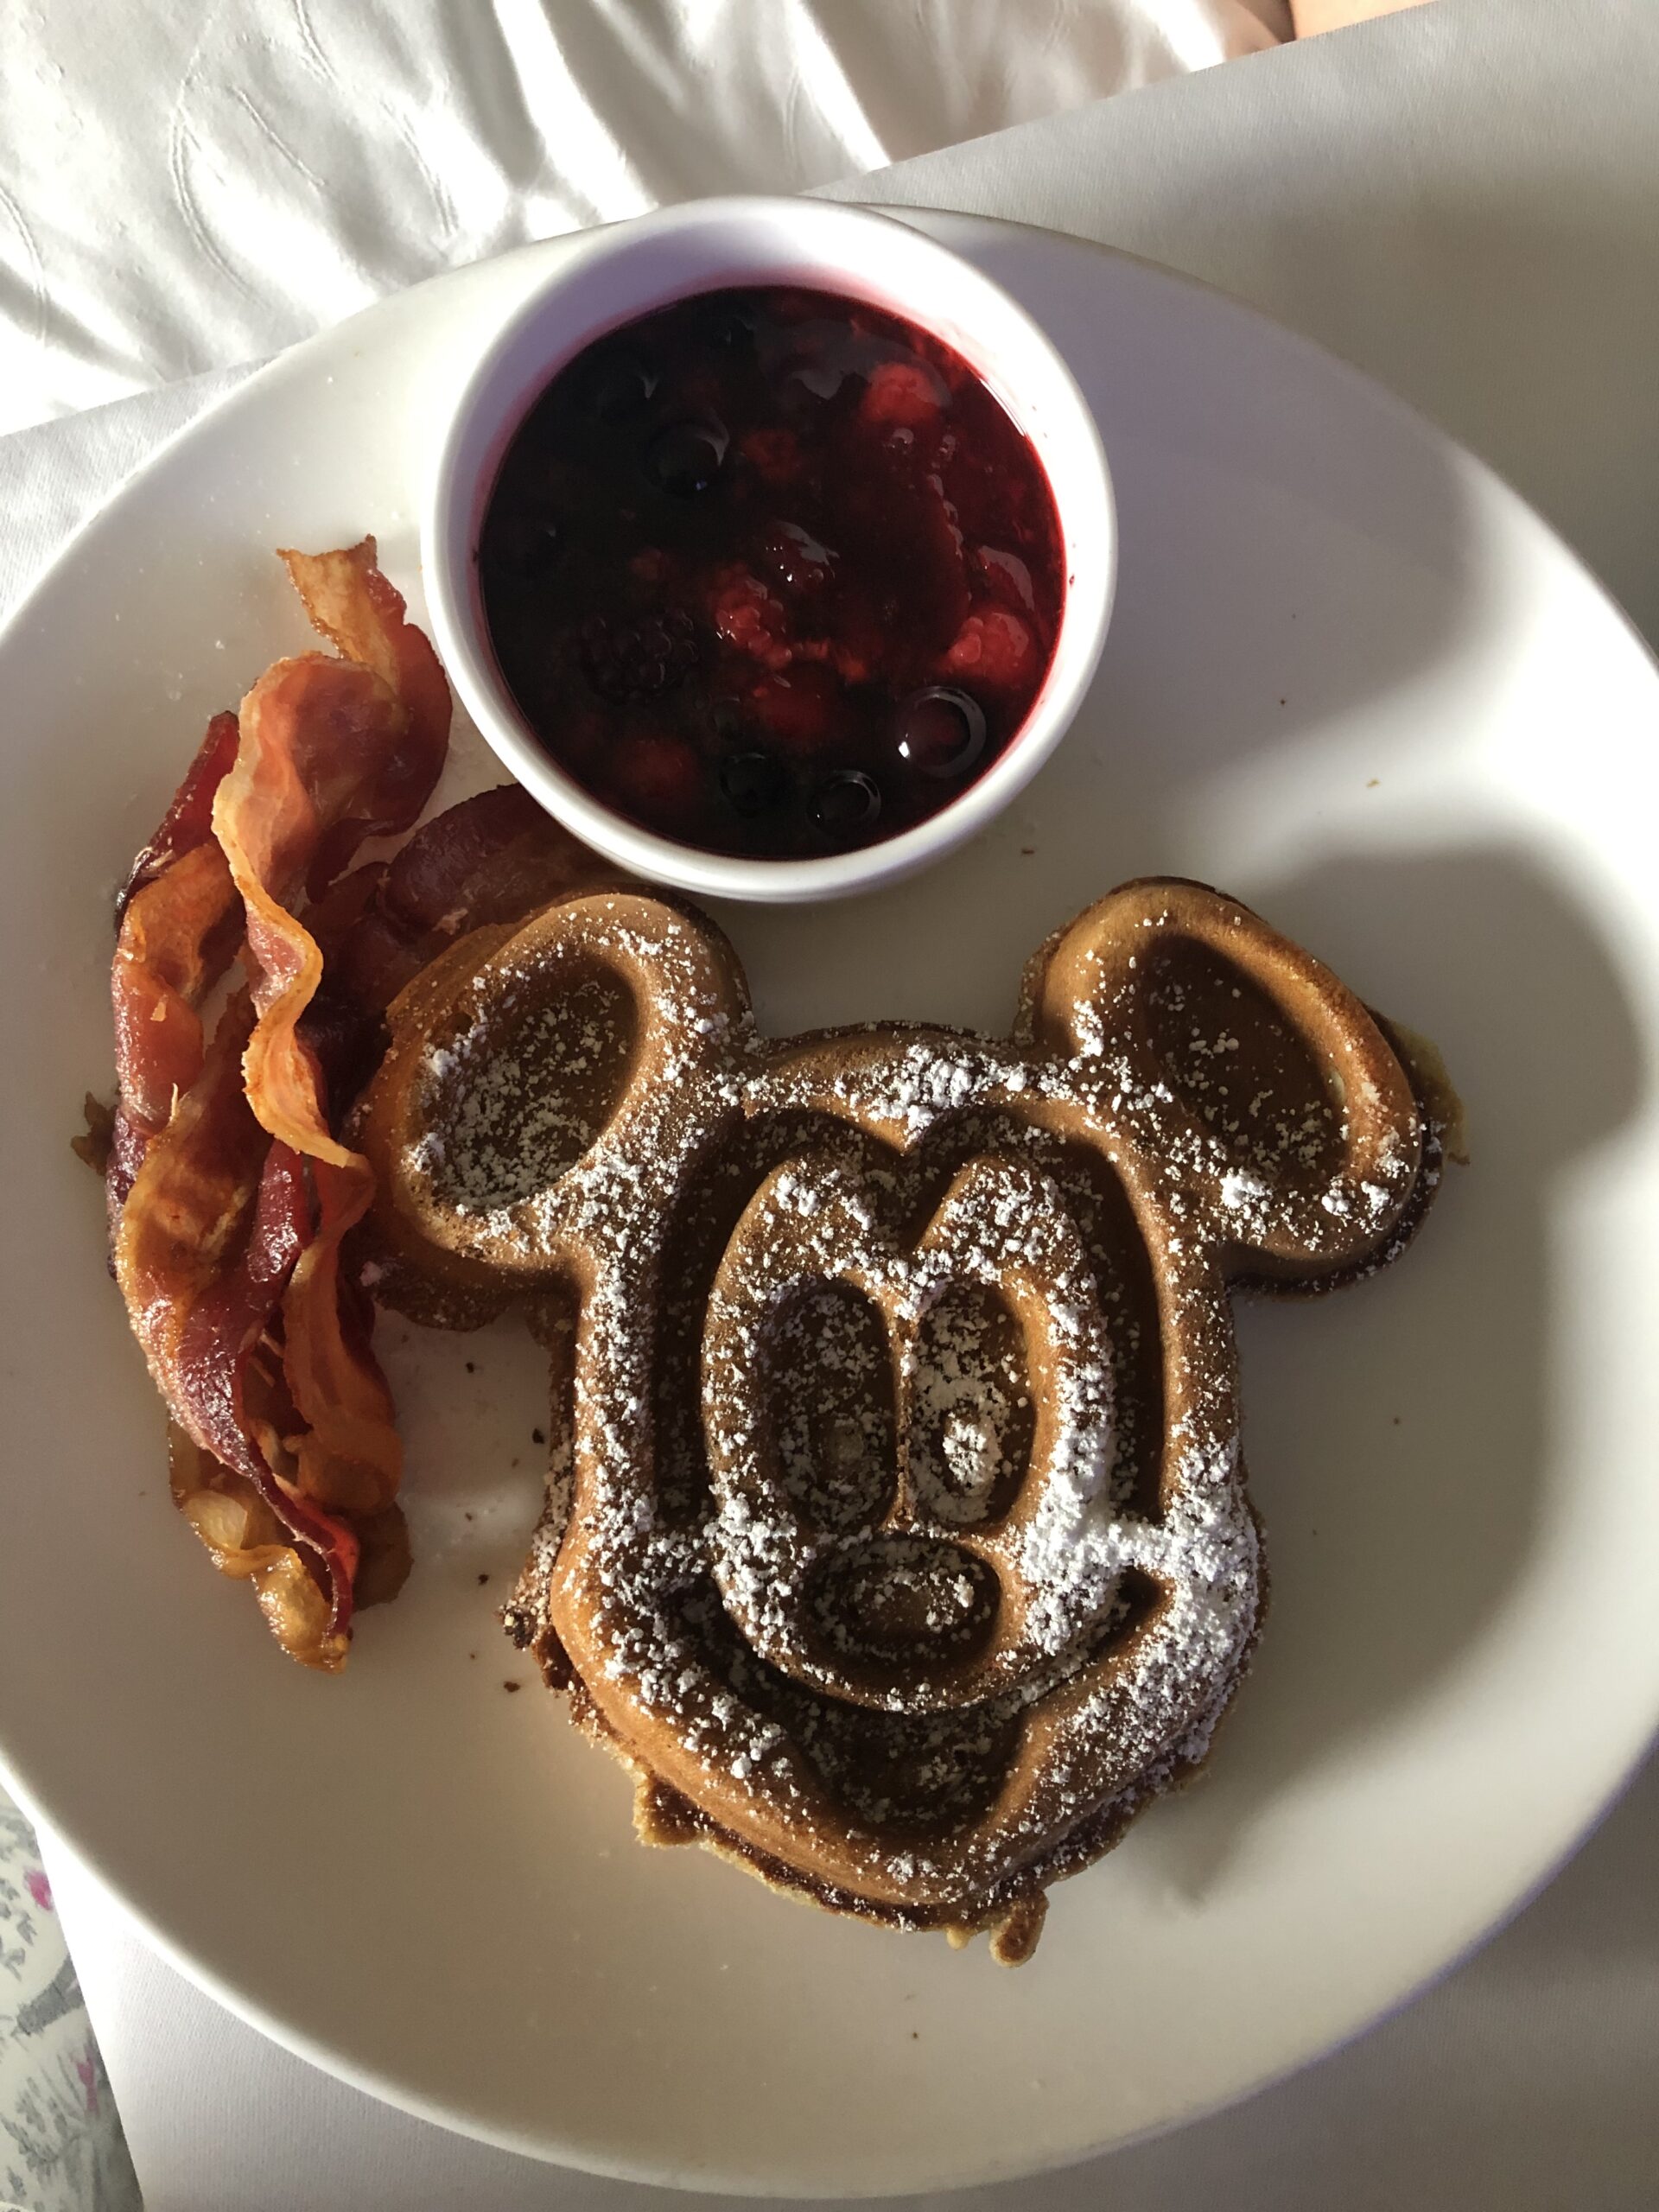 Mickey Waffles will happen once again.